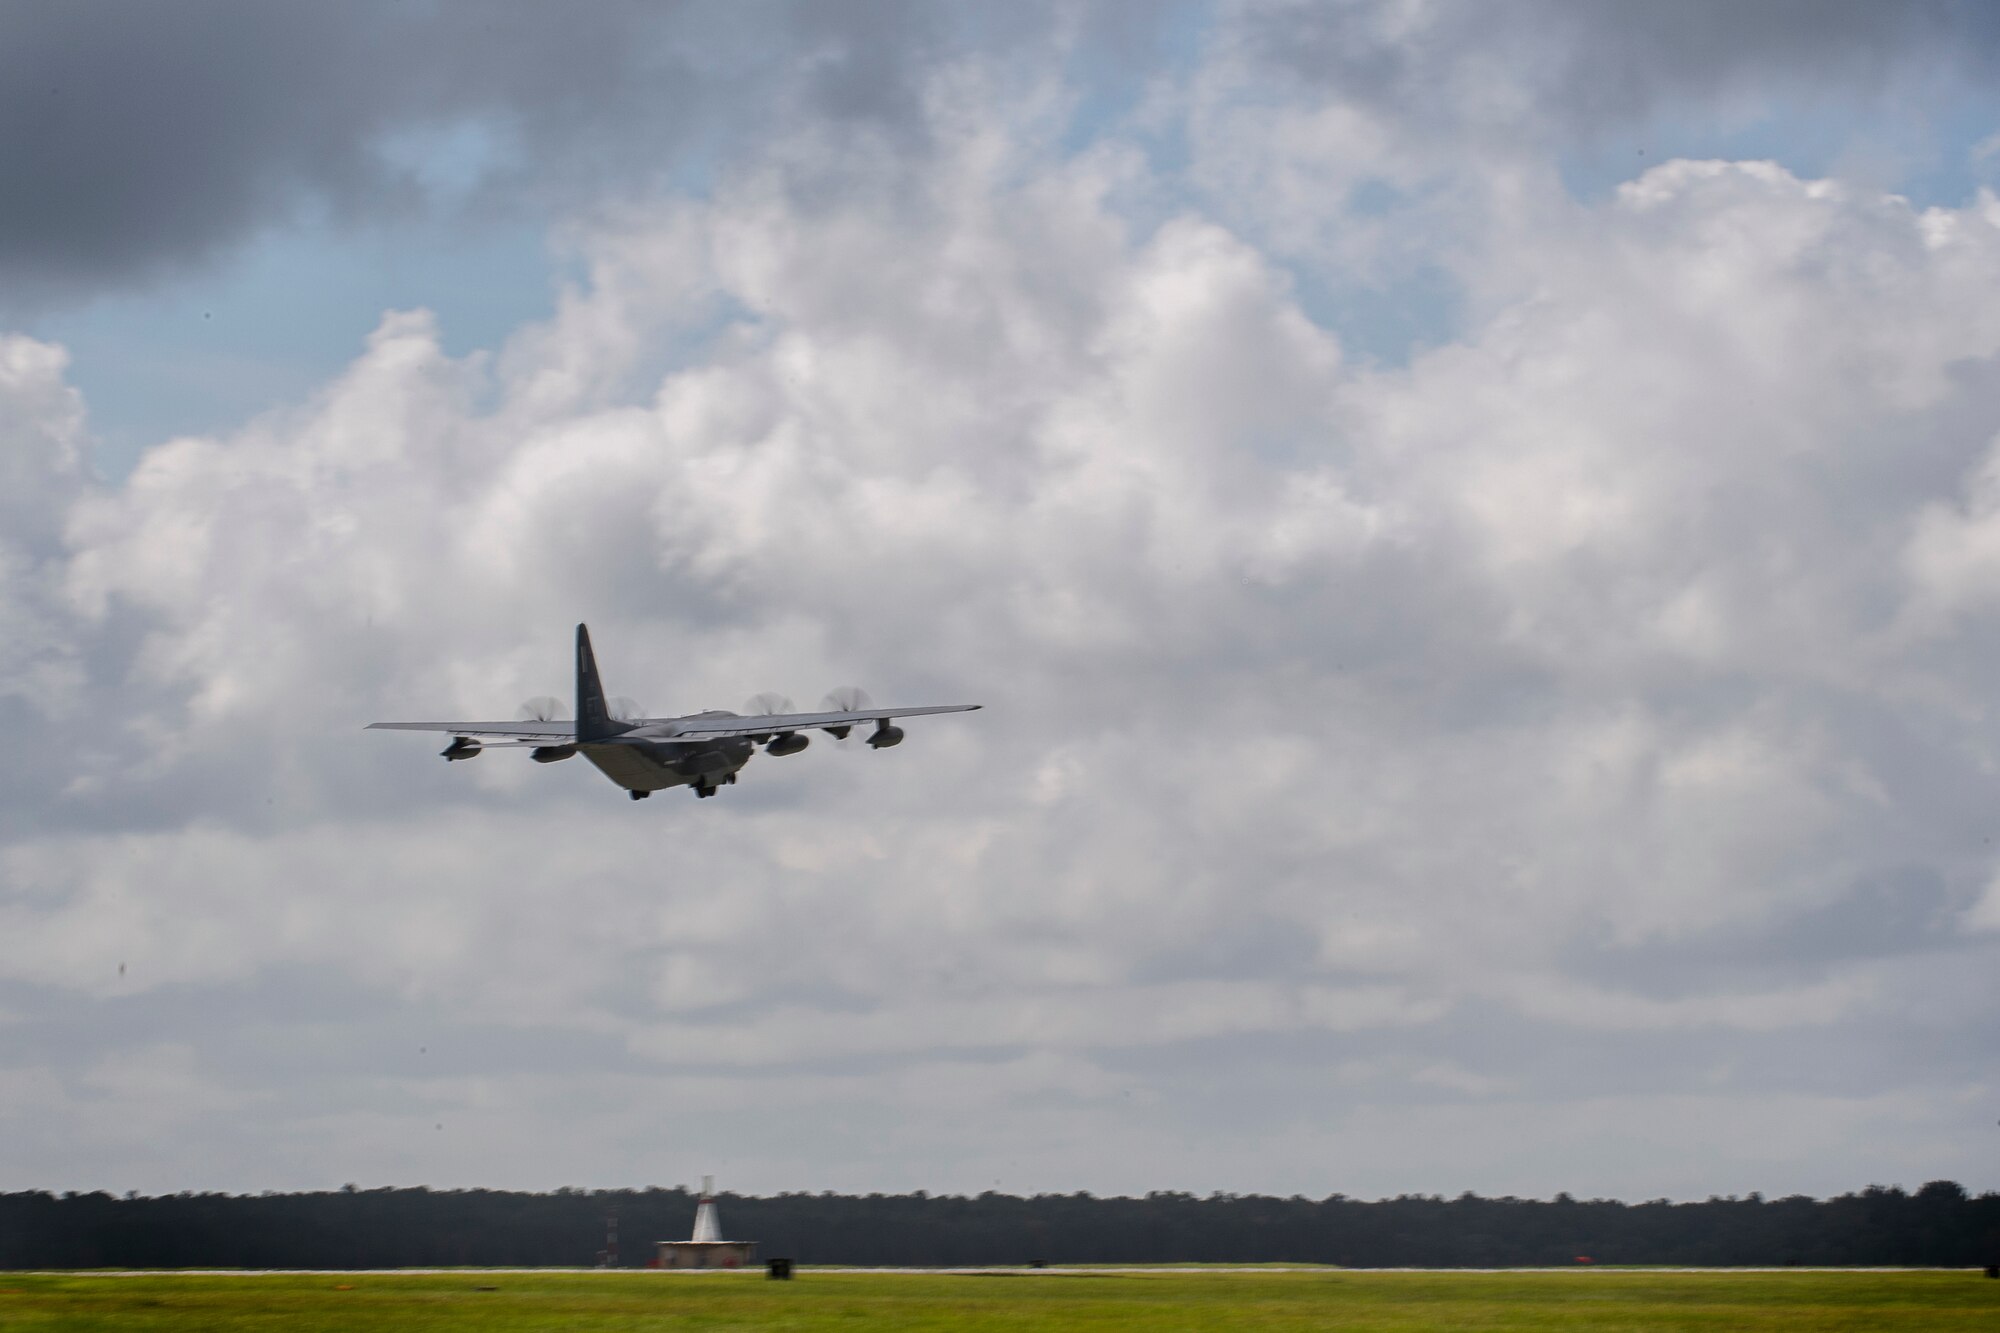 An HC-130J Combat King II cargo aircraft from the 71st Rescue Squadron departs Moody Air Force Base, Georgia, Aug. 29, 2021. The rescue squadron supplied the aircraft for the transportation of more than 160 members from the 822nd Base Defense Squadron to Holloman Air Force Base, New Mexico, in support of Task Force – Holloman. The Department of Defense, through U.S. Northern Command, and in support of the Department of Homeland Security, is providing transportation, temporary housing, medical screening, and general support for at least 50,000 Afghan evacuees at suitable facilities, in permanent or temporary structures, as quickly as possible. This initiative provides Afghan personnel essential support at secure locations outside Afghanistan. (U.S. Air Force photo by Master Sgt. Daryl Knee)